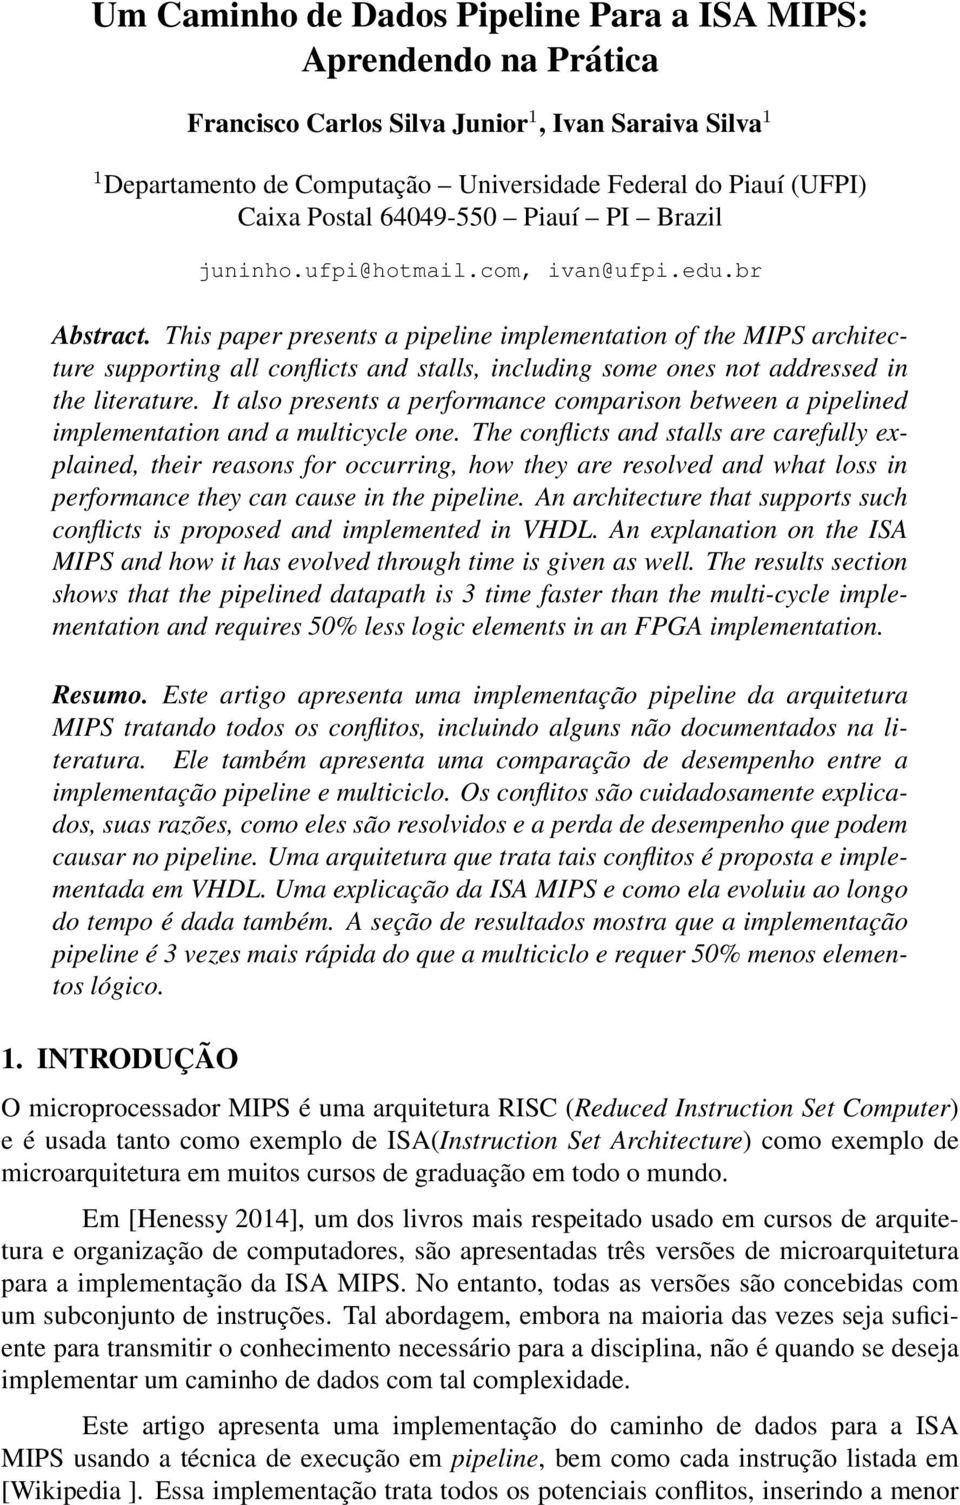 This paper presents a pipeline implementation of the MIPS architecture supporting all conflicts and stalls, including some ones not addressed in the literature.